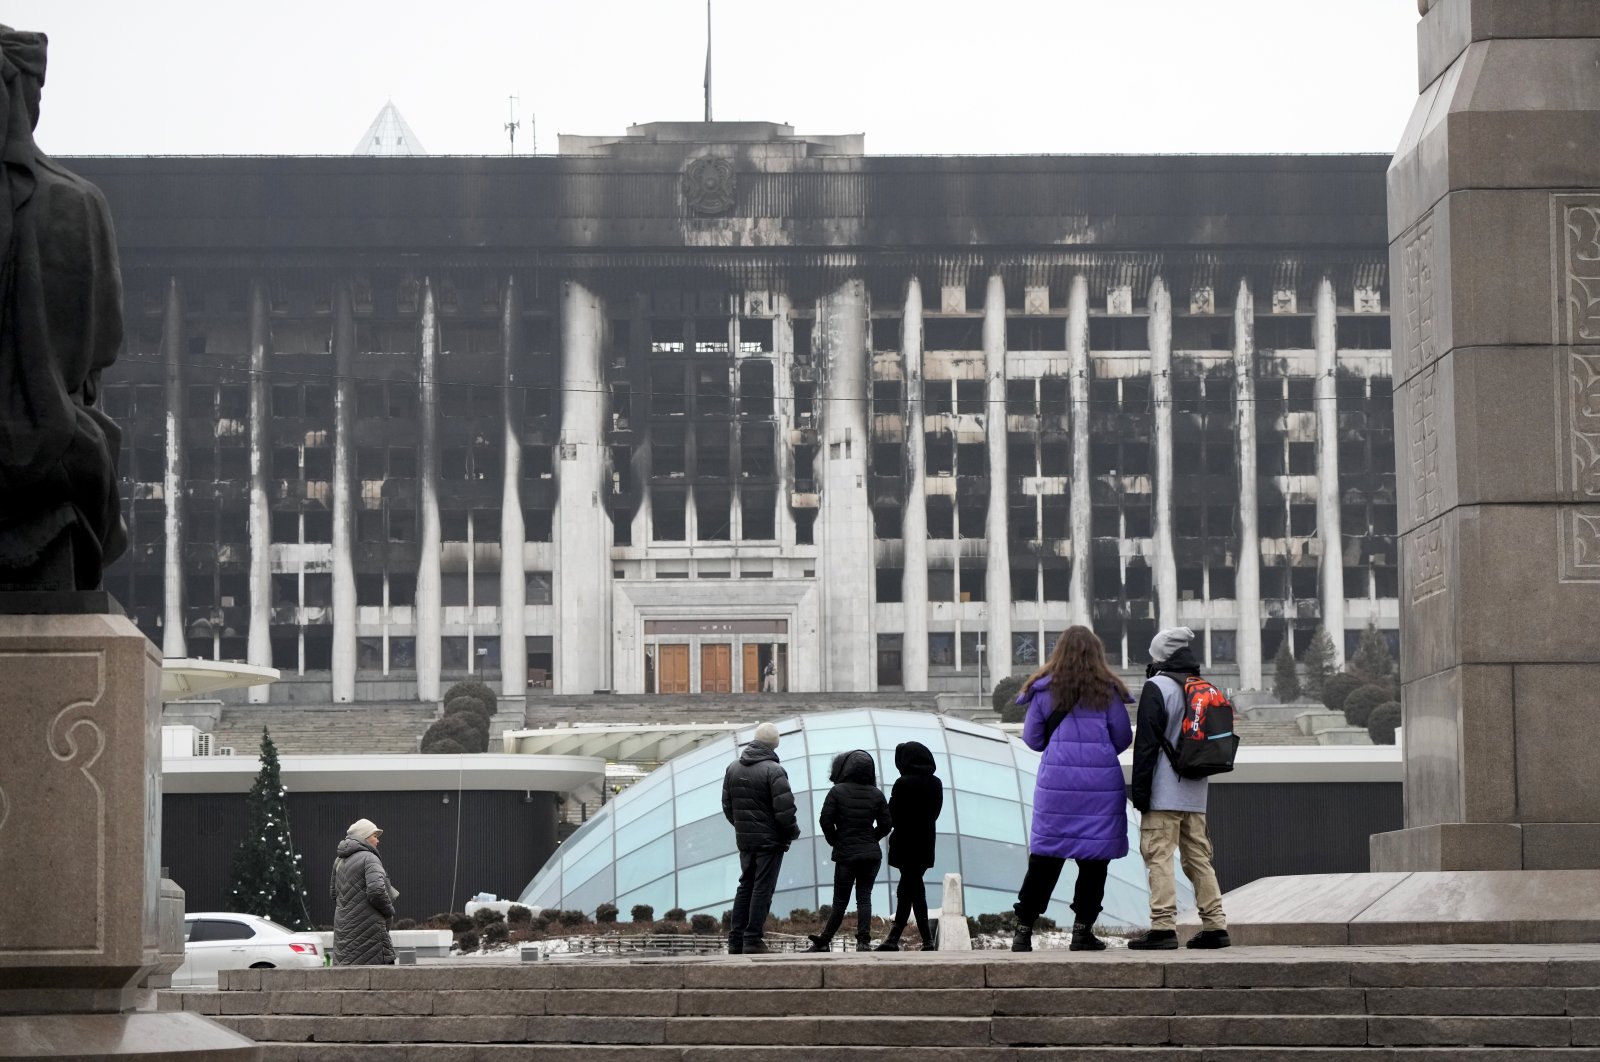 People look at the burnt city hall building in the central square blocked by Kazakh troops and police in Almaty, Kazakhstan, Jan. 11, 2022. (AP Photo)